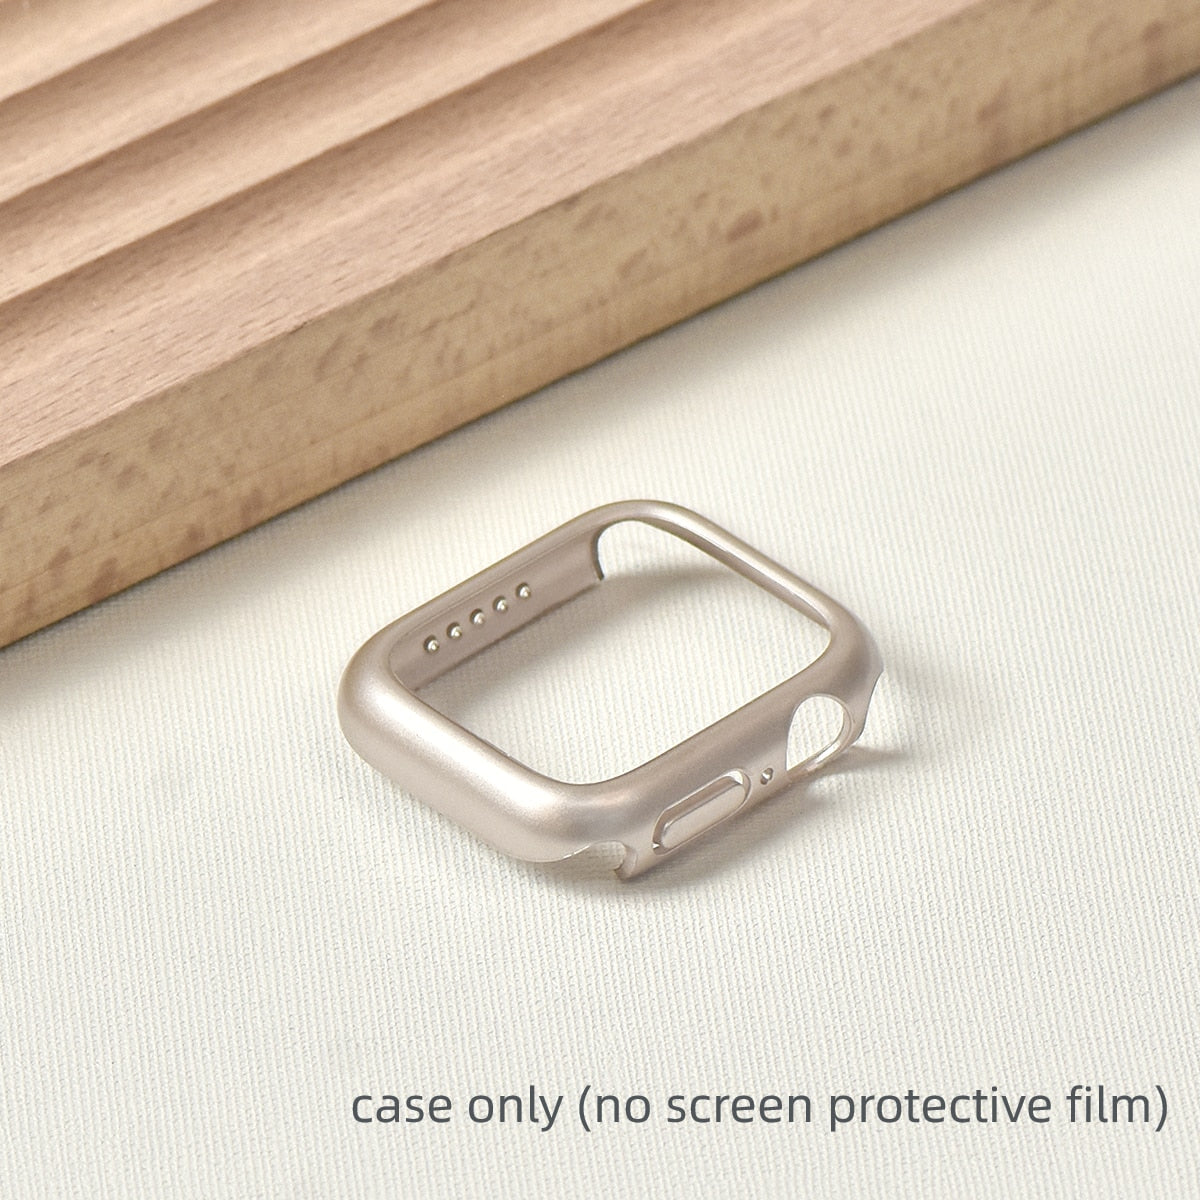 Hard PC Starlight Cover For Apple Watch Case 41mm 45mm 7 8 6 5 42MM 38MM 3 2 SE 40mm 44mm Protector Bumper for iwatch Case 49mm - Starlight 04 / Series123 38MM - Starlight 04 / Series123 42MM - Starlight 04 / Series456 SE 40MM - Starlight 04 / Series456 SE 44MM - Starlight 04 / Series78 41MM - Starlight 04 / Series78 45MM - Starlight 04 / Ultra 49mm